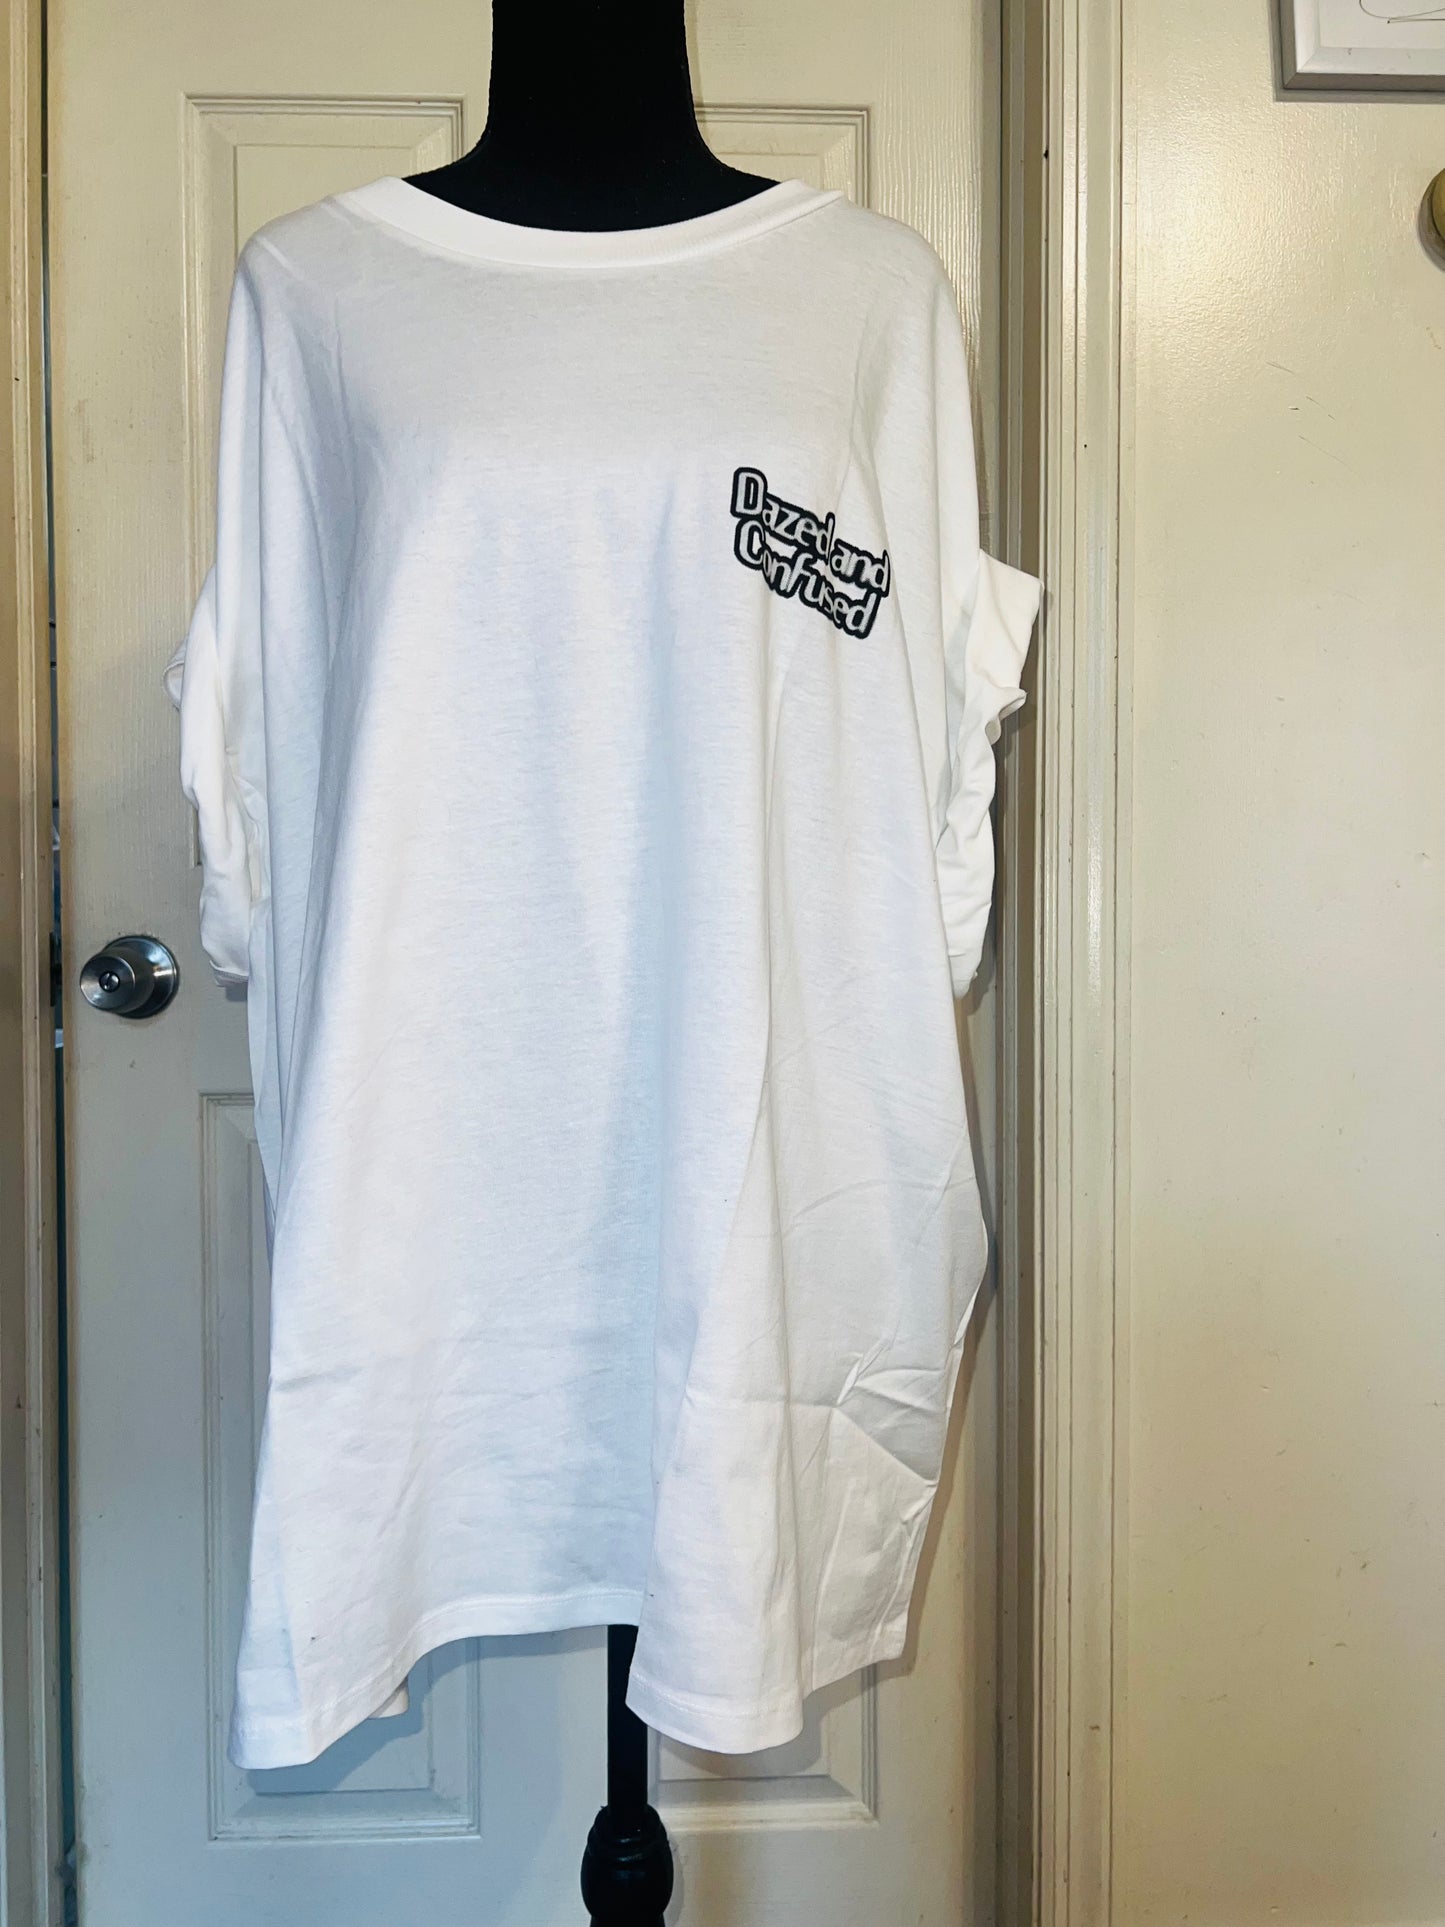 Dazed and Confused Double Sided Distressed Tee